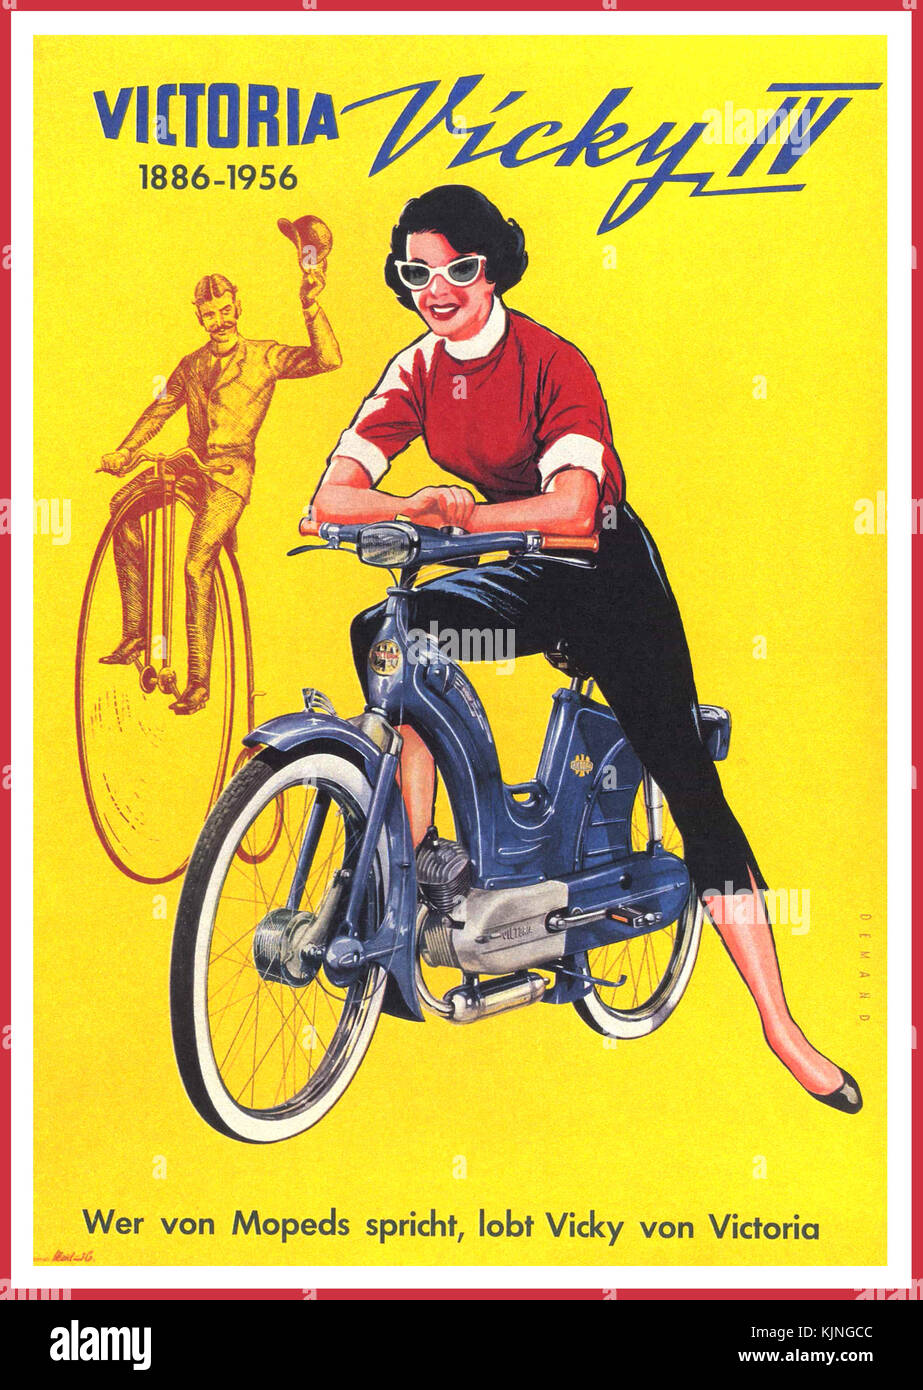 Vintage advertisement poster Moped Motorcycle  Victoria, Vicky IV !950's Stock Photo